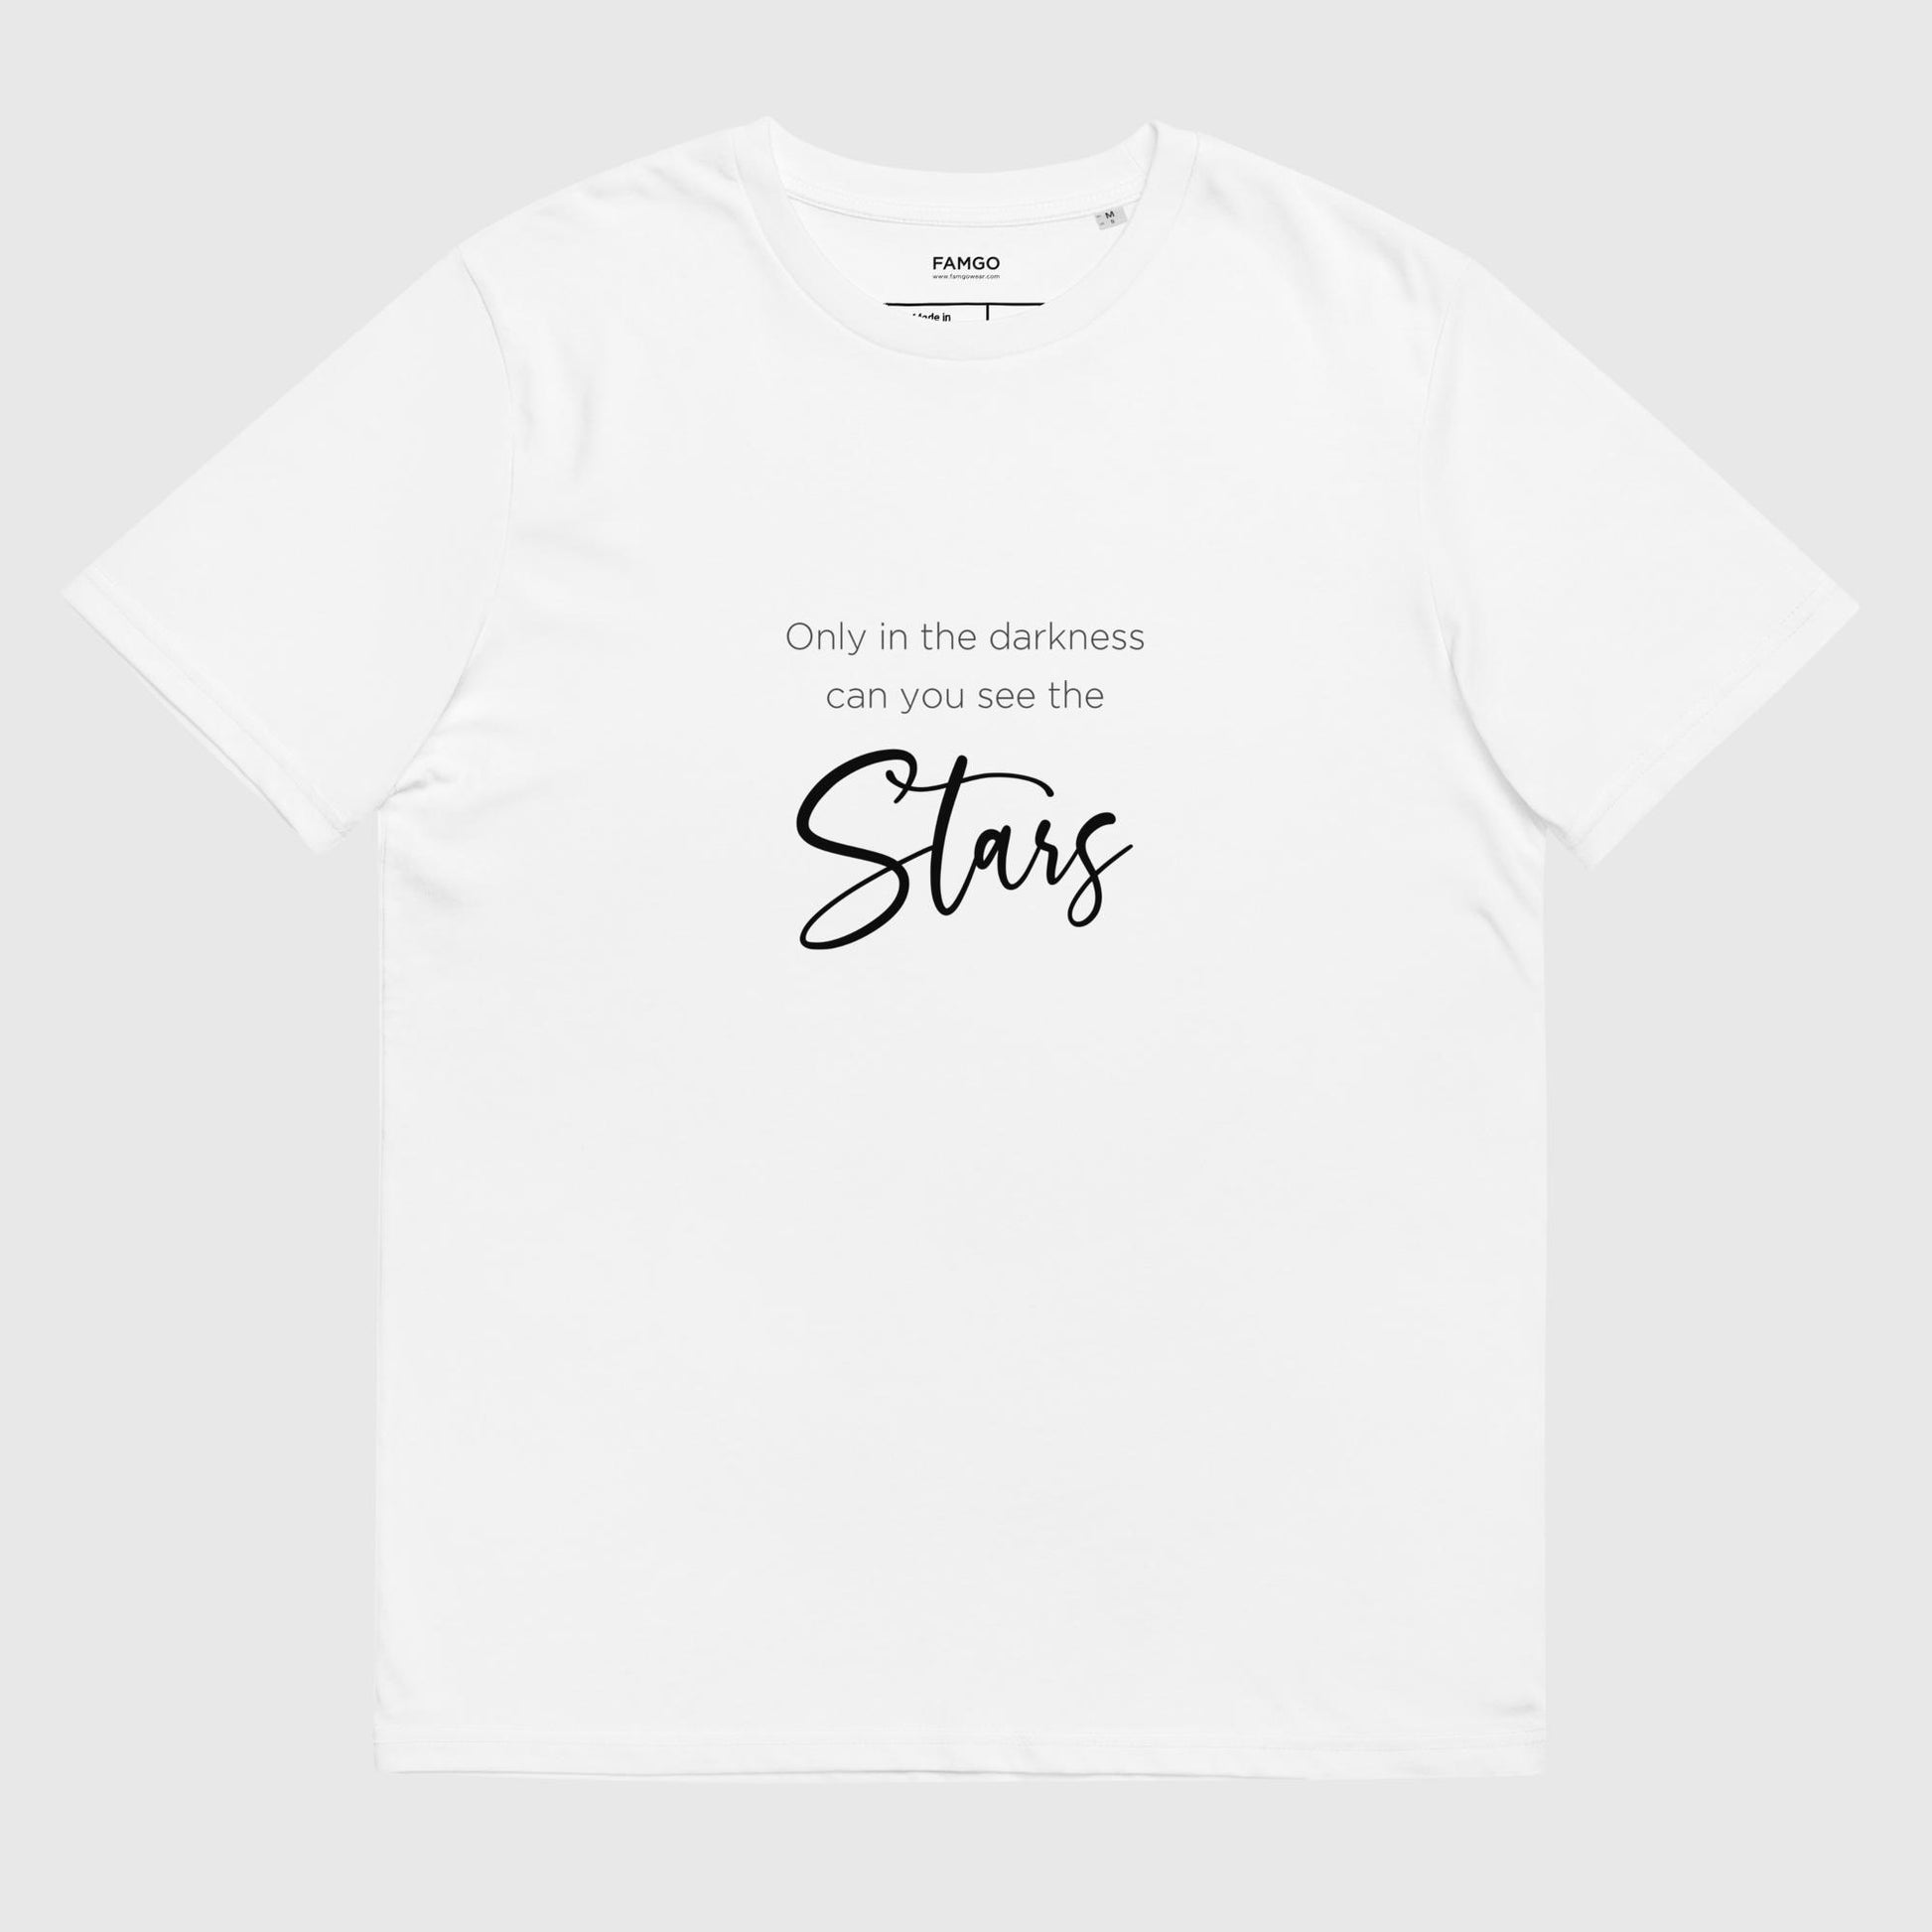 Men's white organic cotton t-shirt that features Dr. Martin Luther King Jr's inspirational quote, "Only In The Darkness Can You See The Stars."